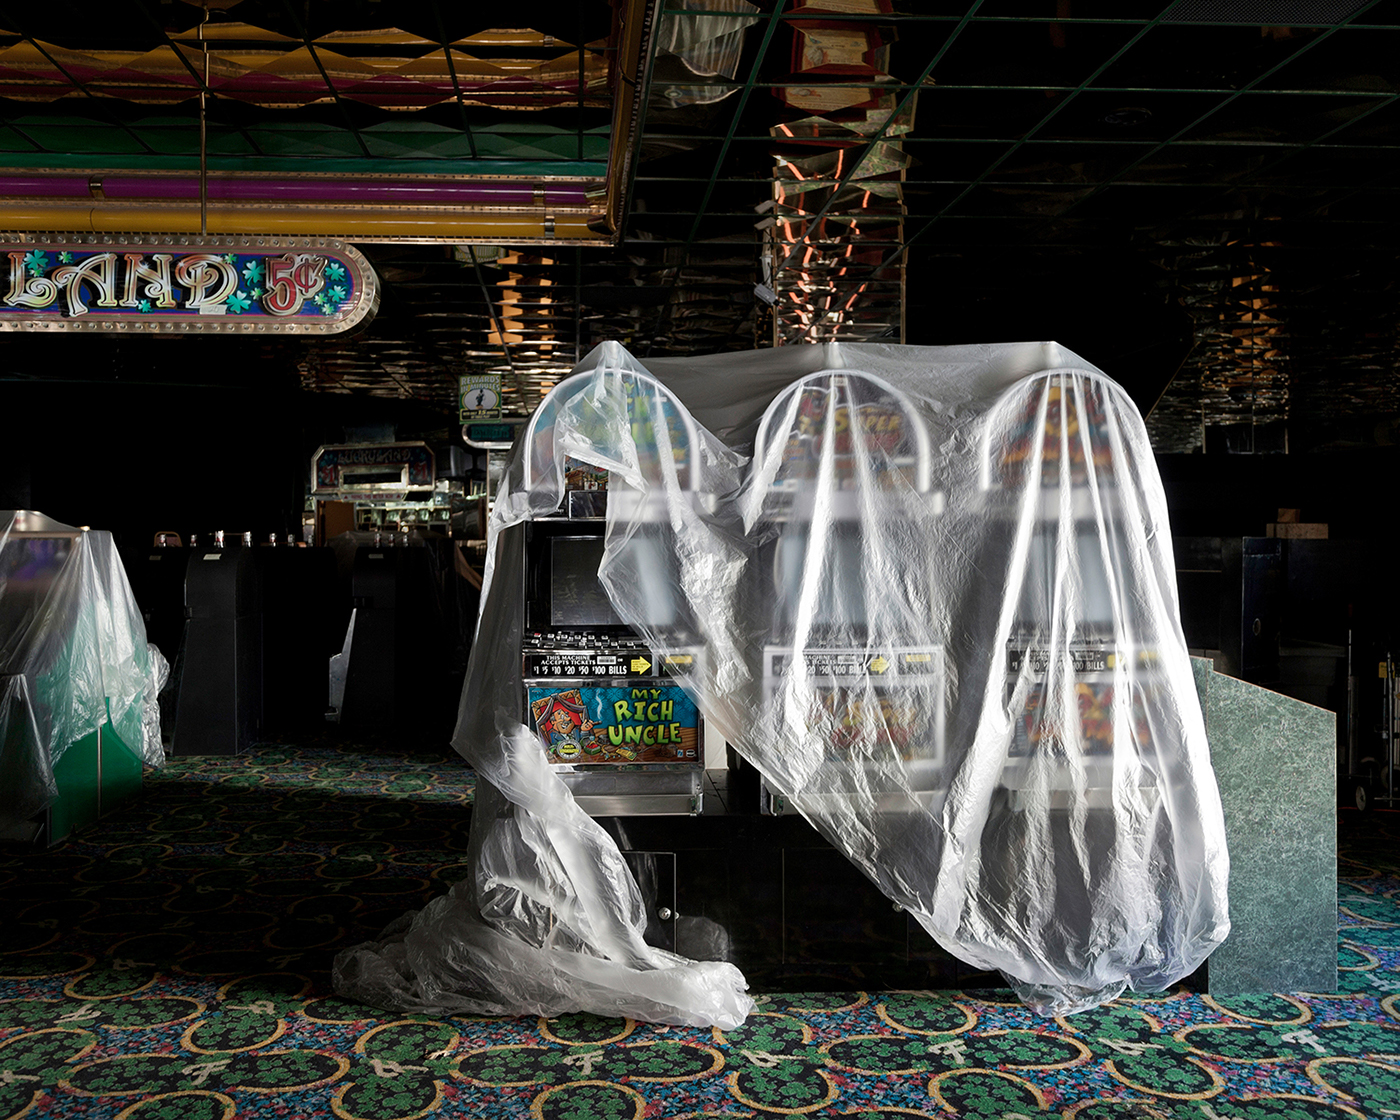 Wandering in Place Reno nevada Documentary Photography fine art Deadpan Photography